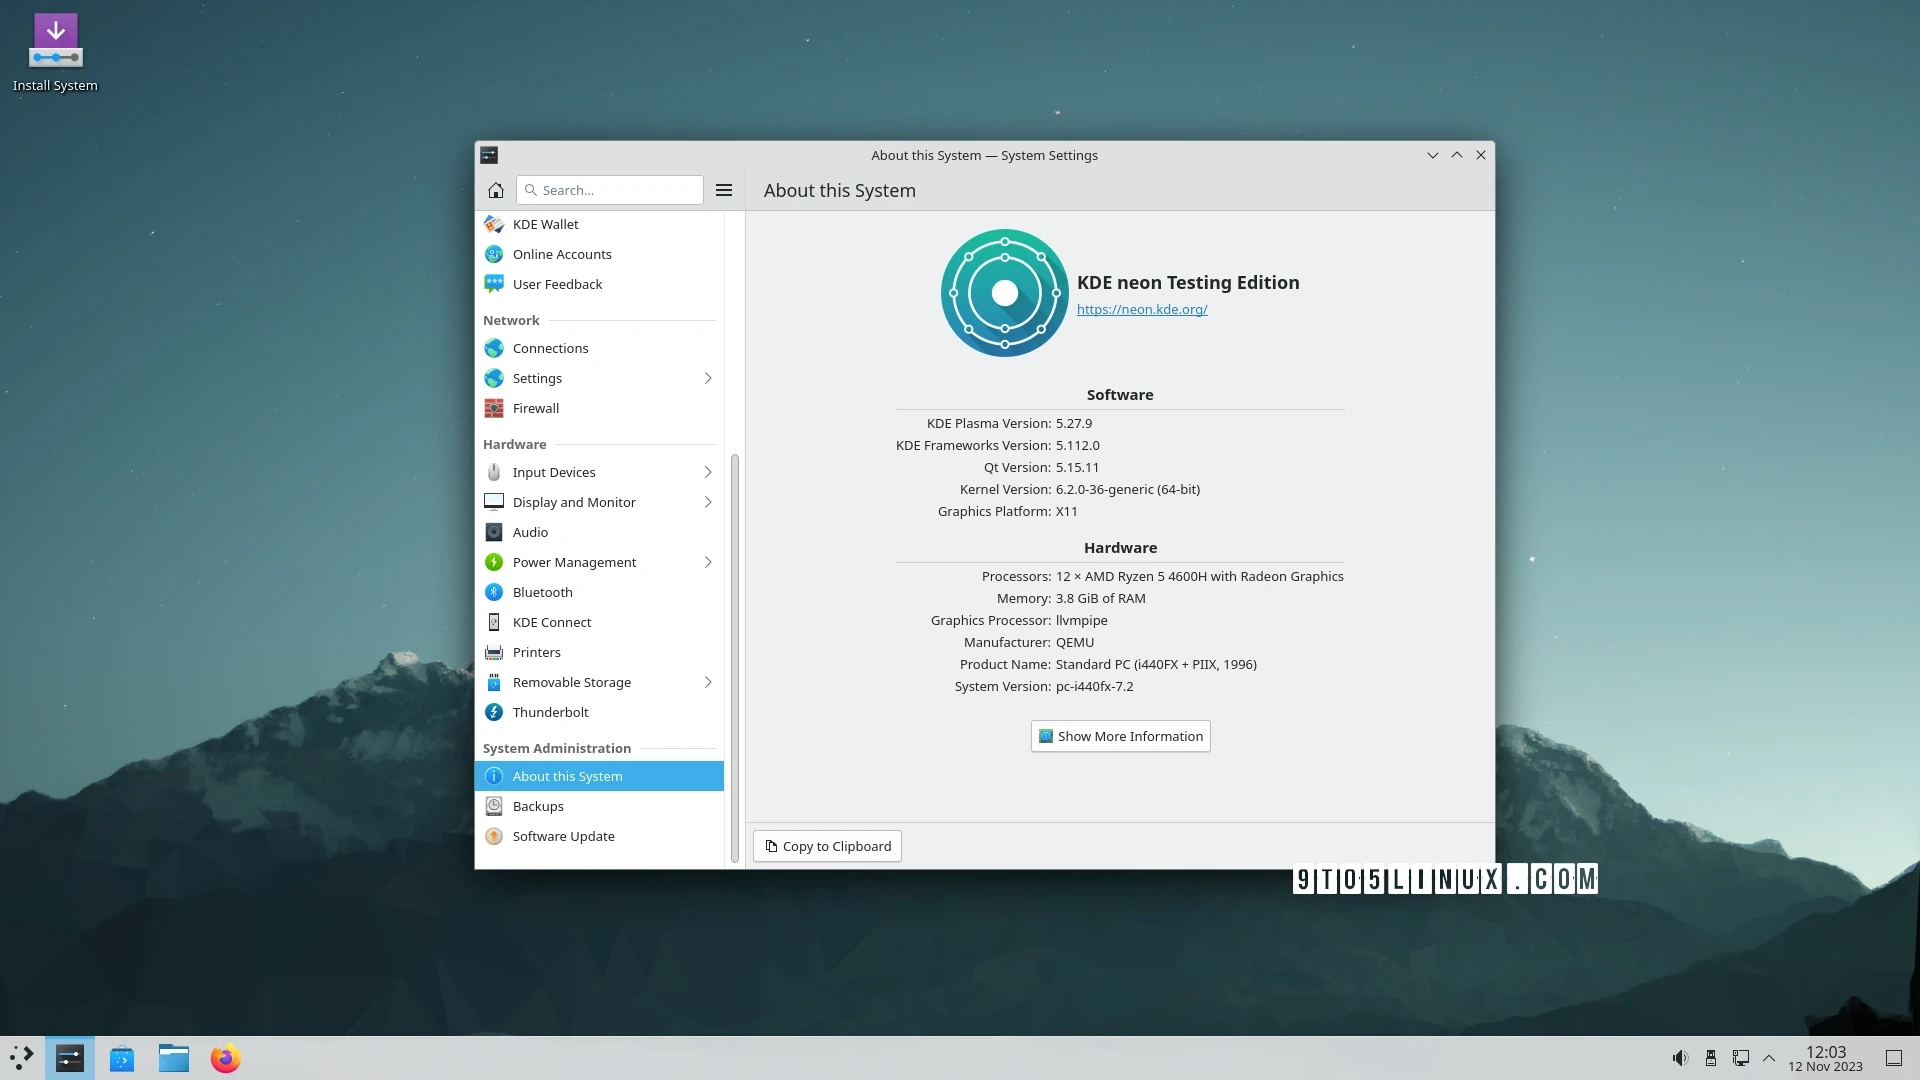 Enhancements in KDE Frameworks 5.112: Improved Support for NetworkManager 1.44 and Bug Fixes